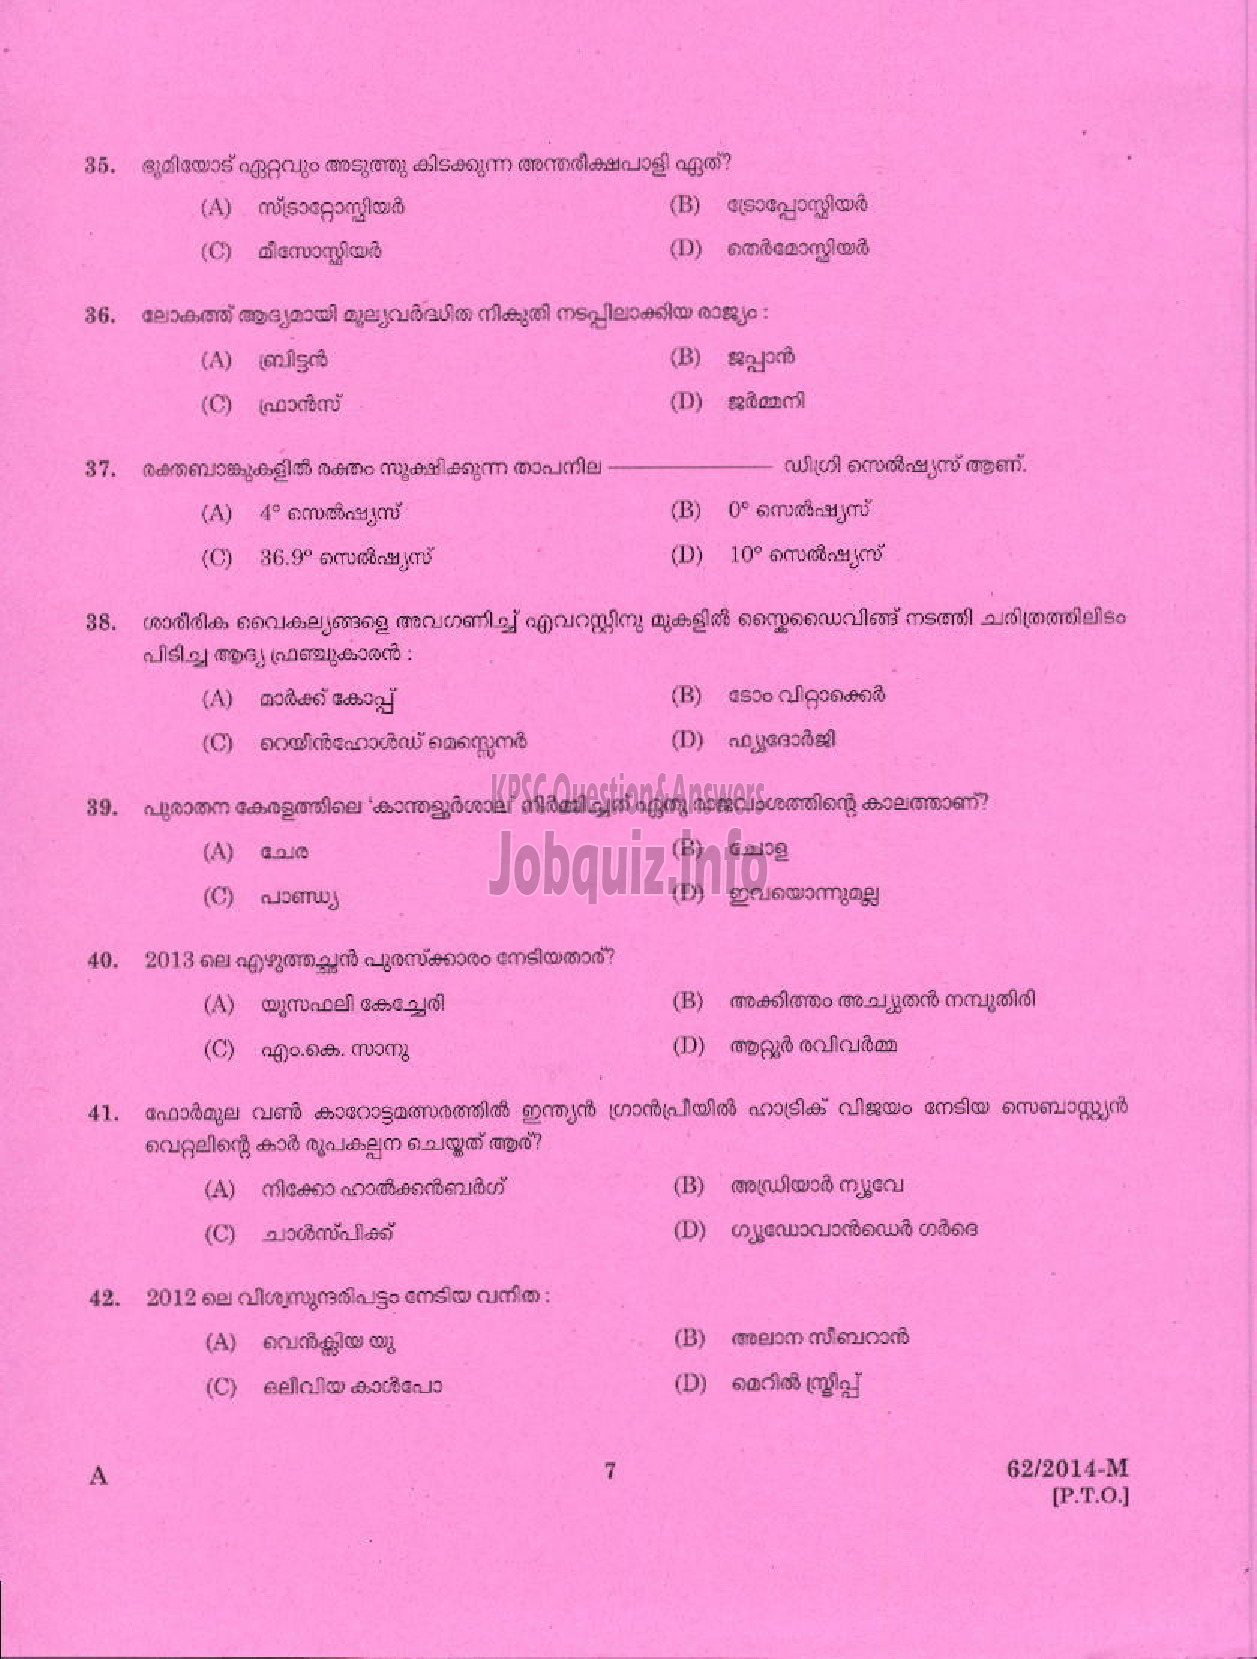 Kerala PSC Question Paper - ATTENDER PLATE CLEANING SURVEY AND LAND RECORDS TVPM ( Malayalam ) -5